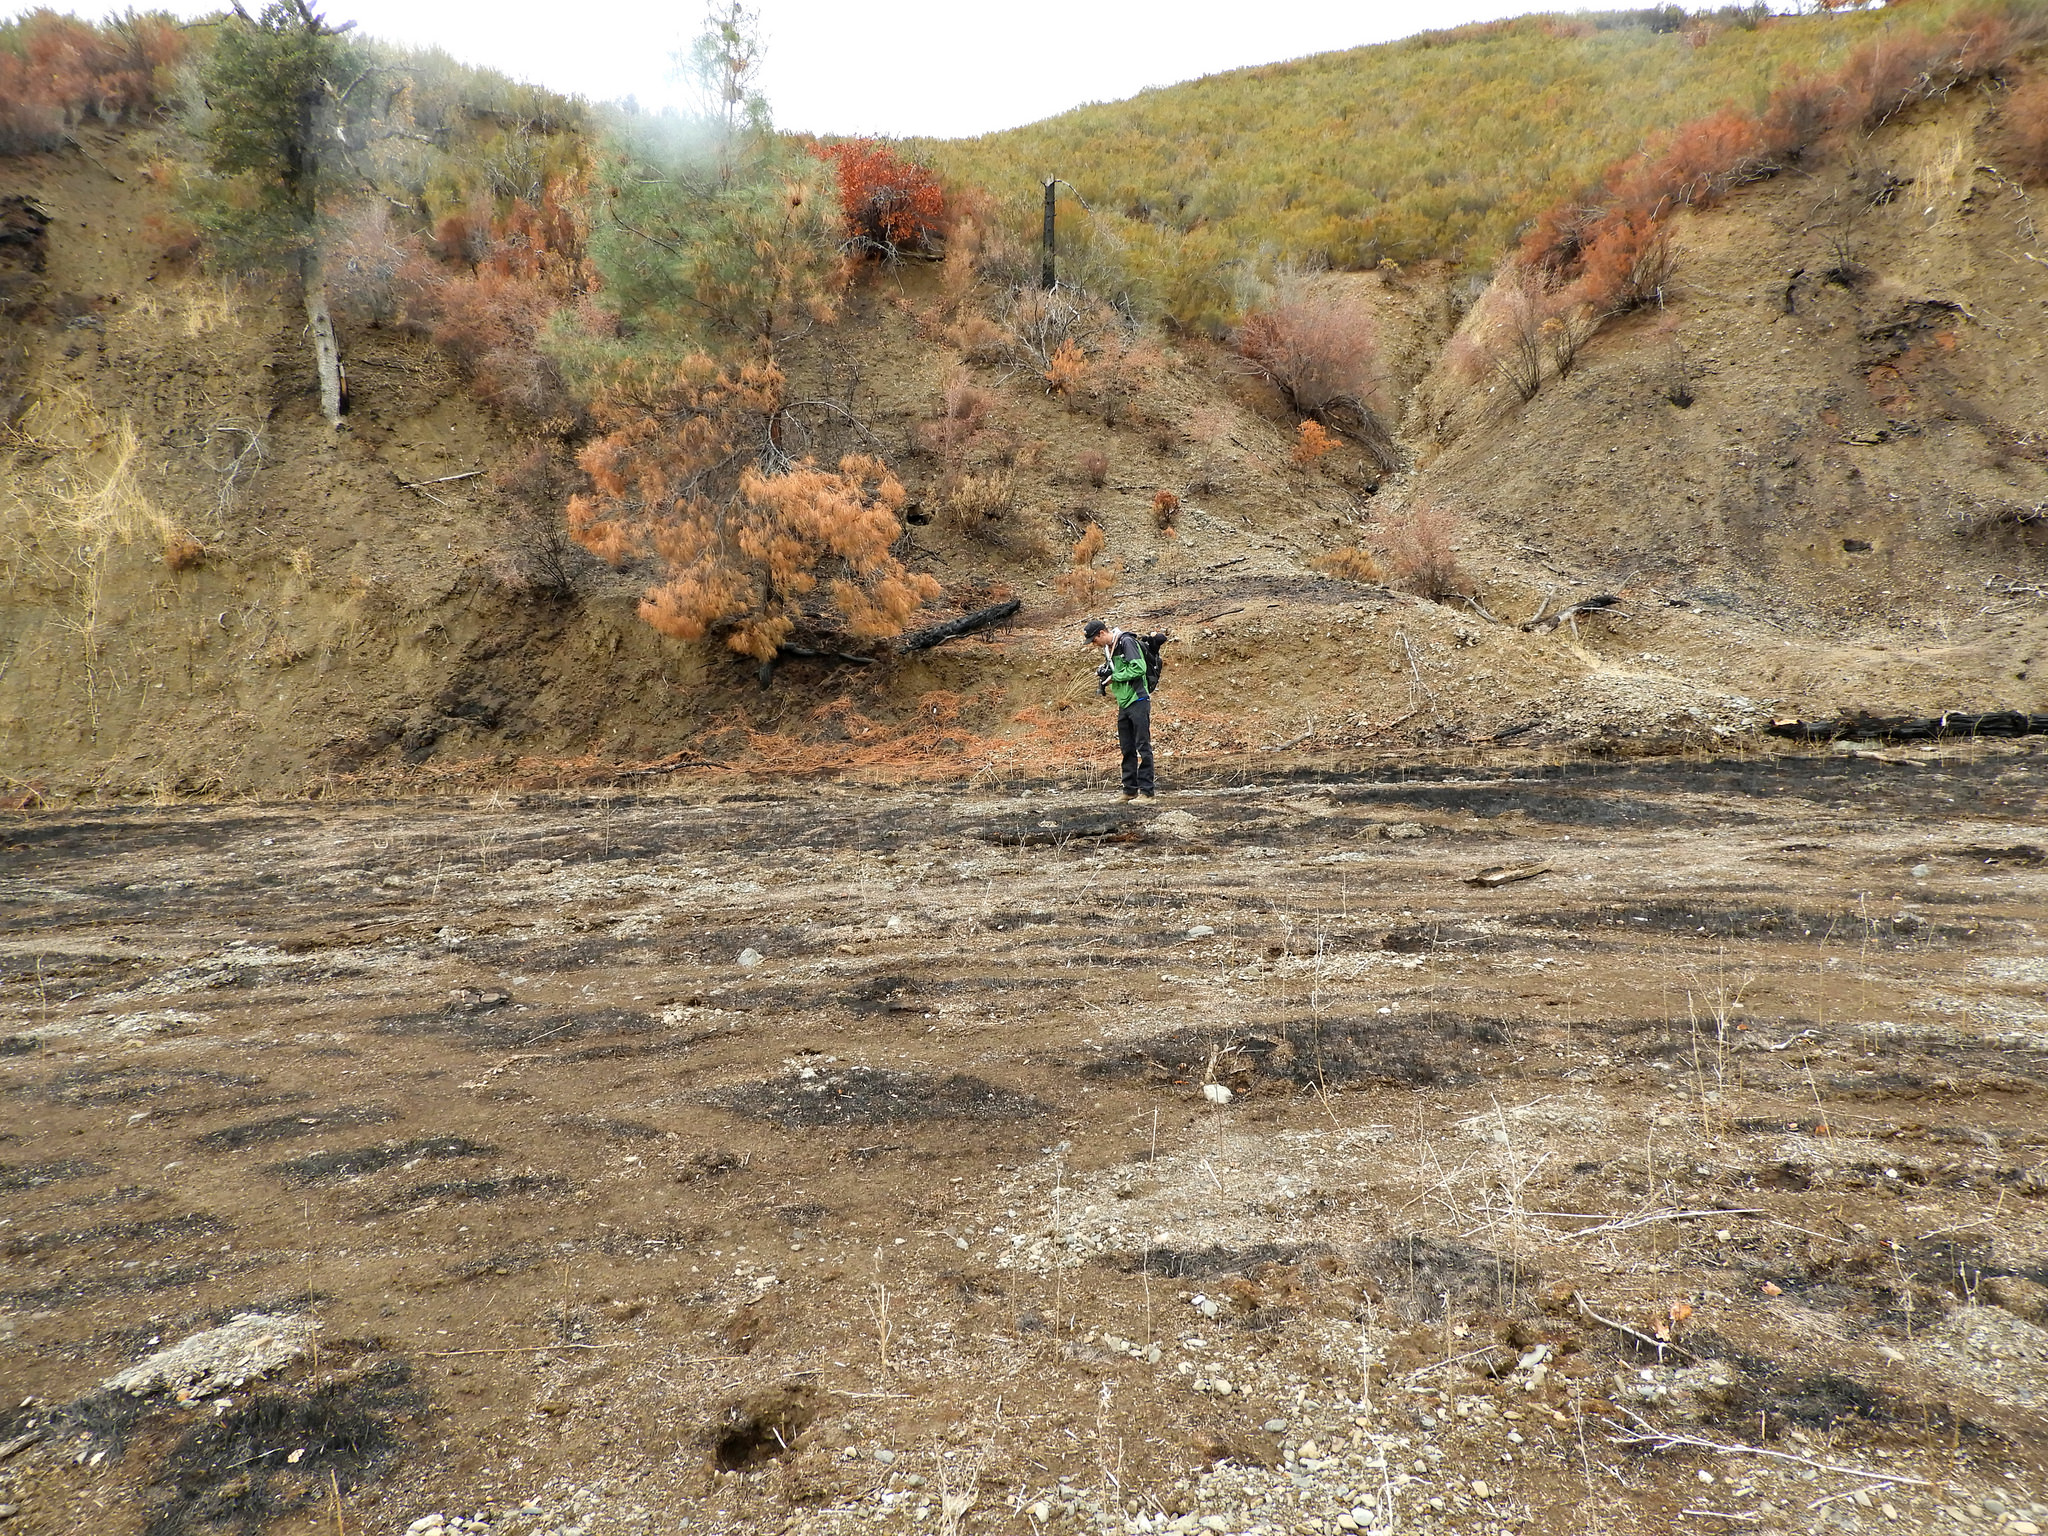 Nate Lillge looks for signs of wildlife on the earth scorched by the Pawnee Fire. [Photo by Mary K. Hanson]